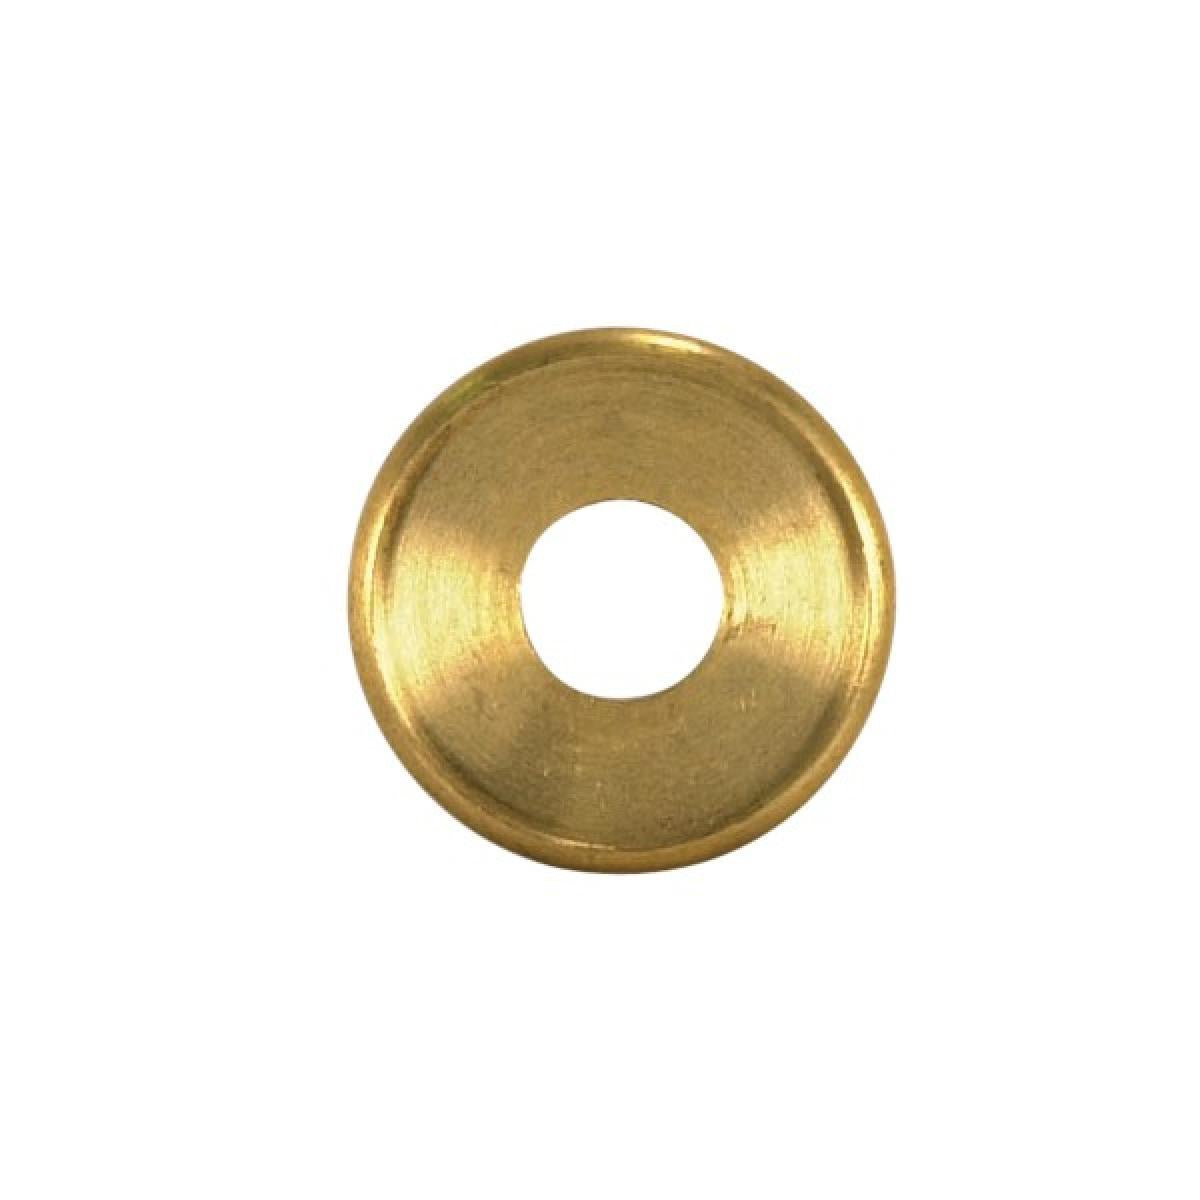 Satco 90-1598 Turned Brass Check Ring 1/8 IP Slip Unfinished 1-1/4" Diameter